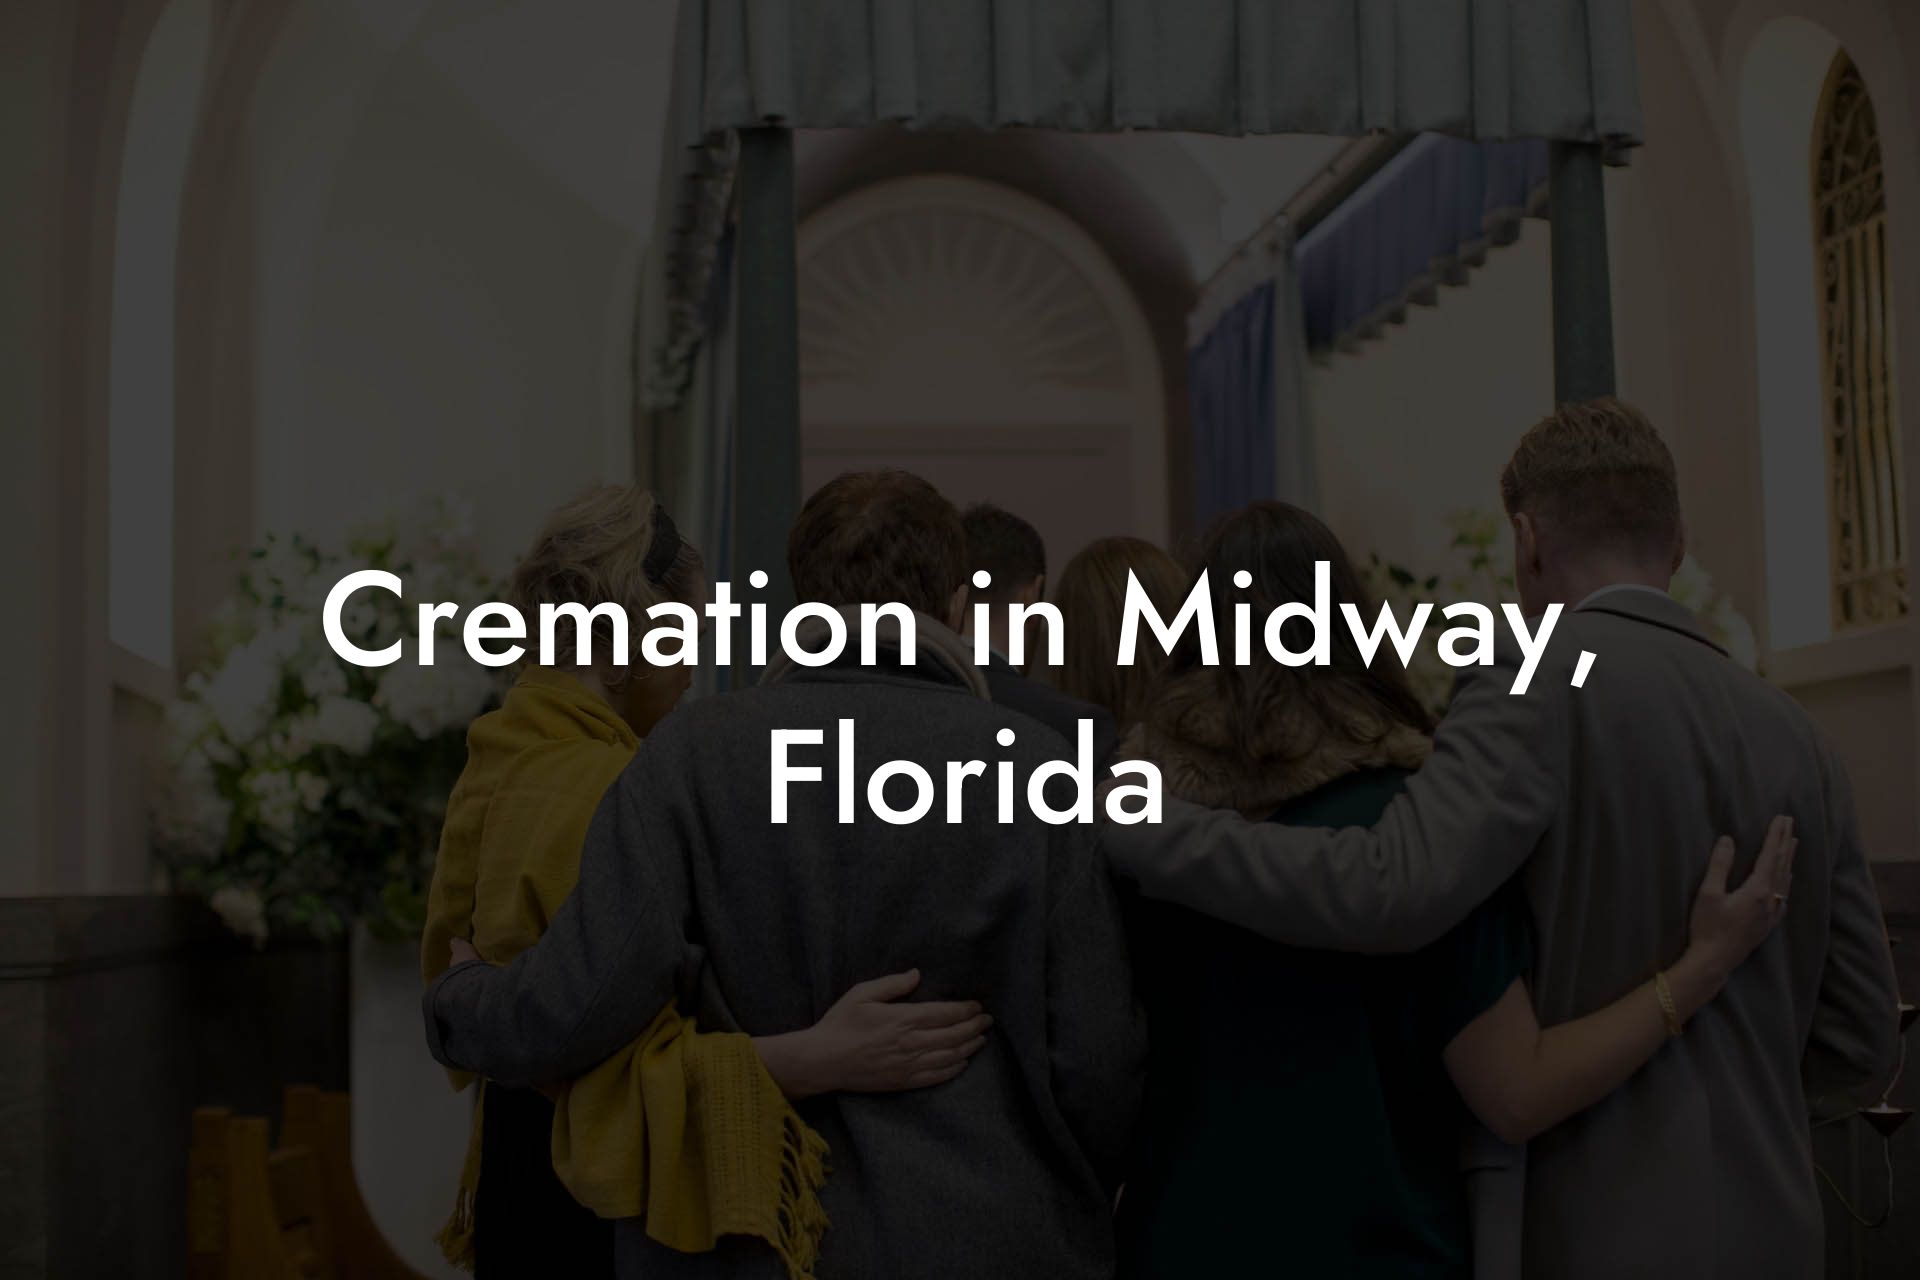 Cremation in Midway, Florida